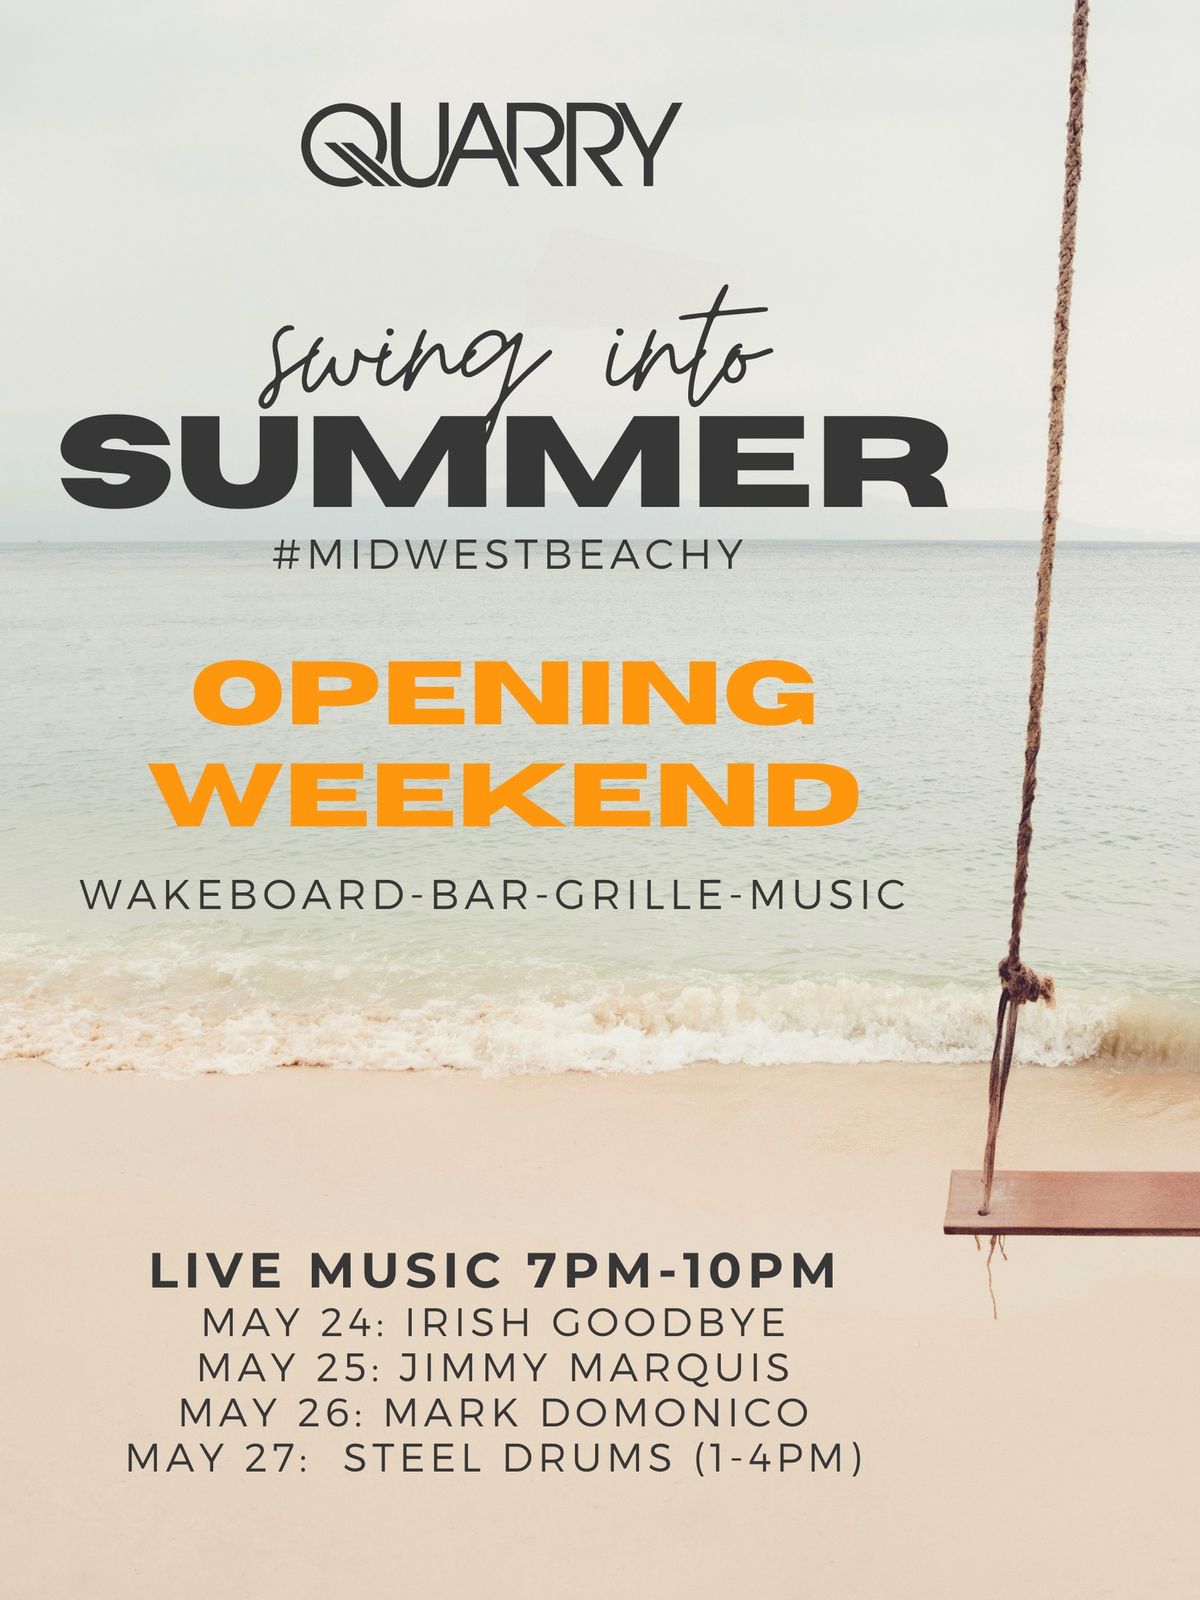 Swing into Summer - Quarry Opening Weekend w\/Live Music